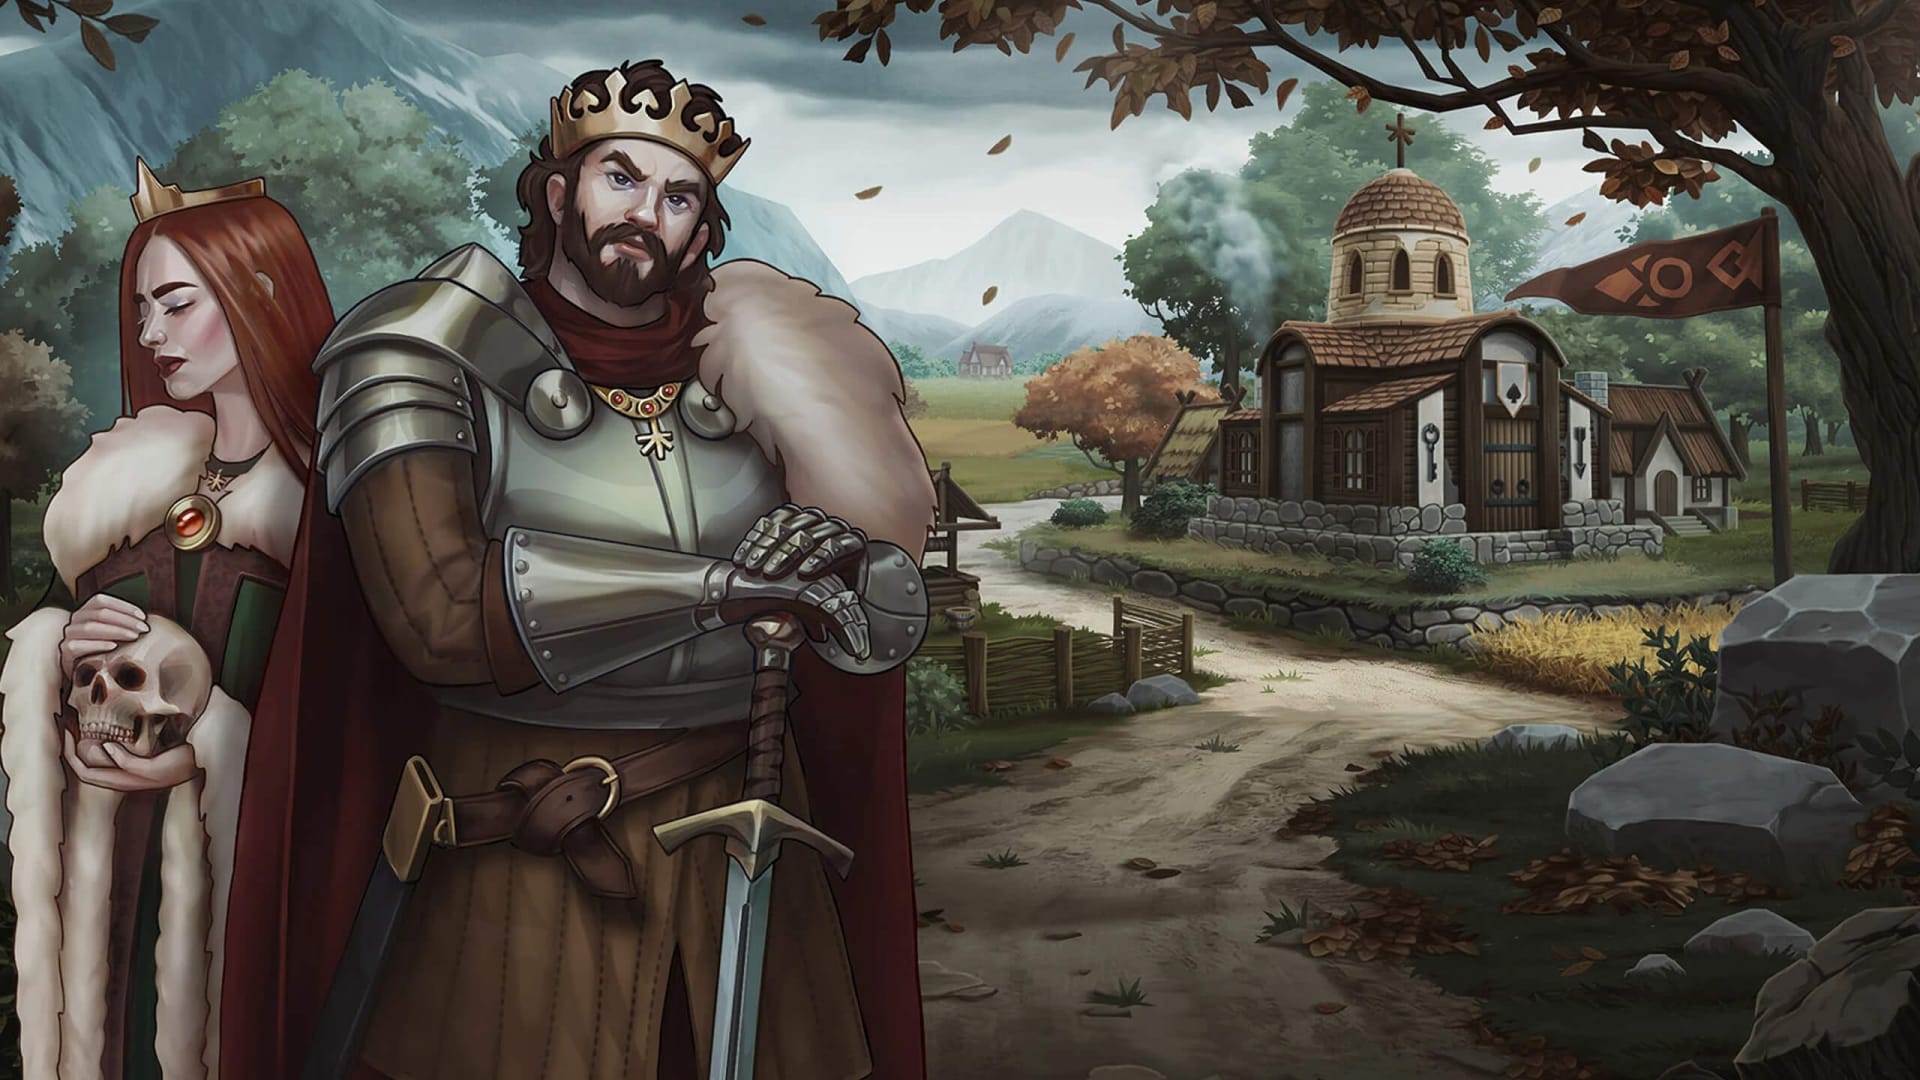 Artwork for the medieval kingdom sim Norland, which has been delayed